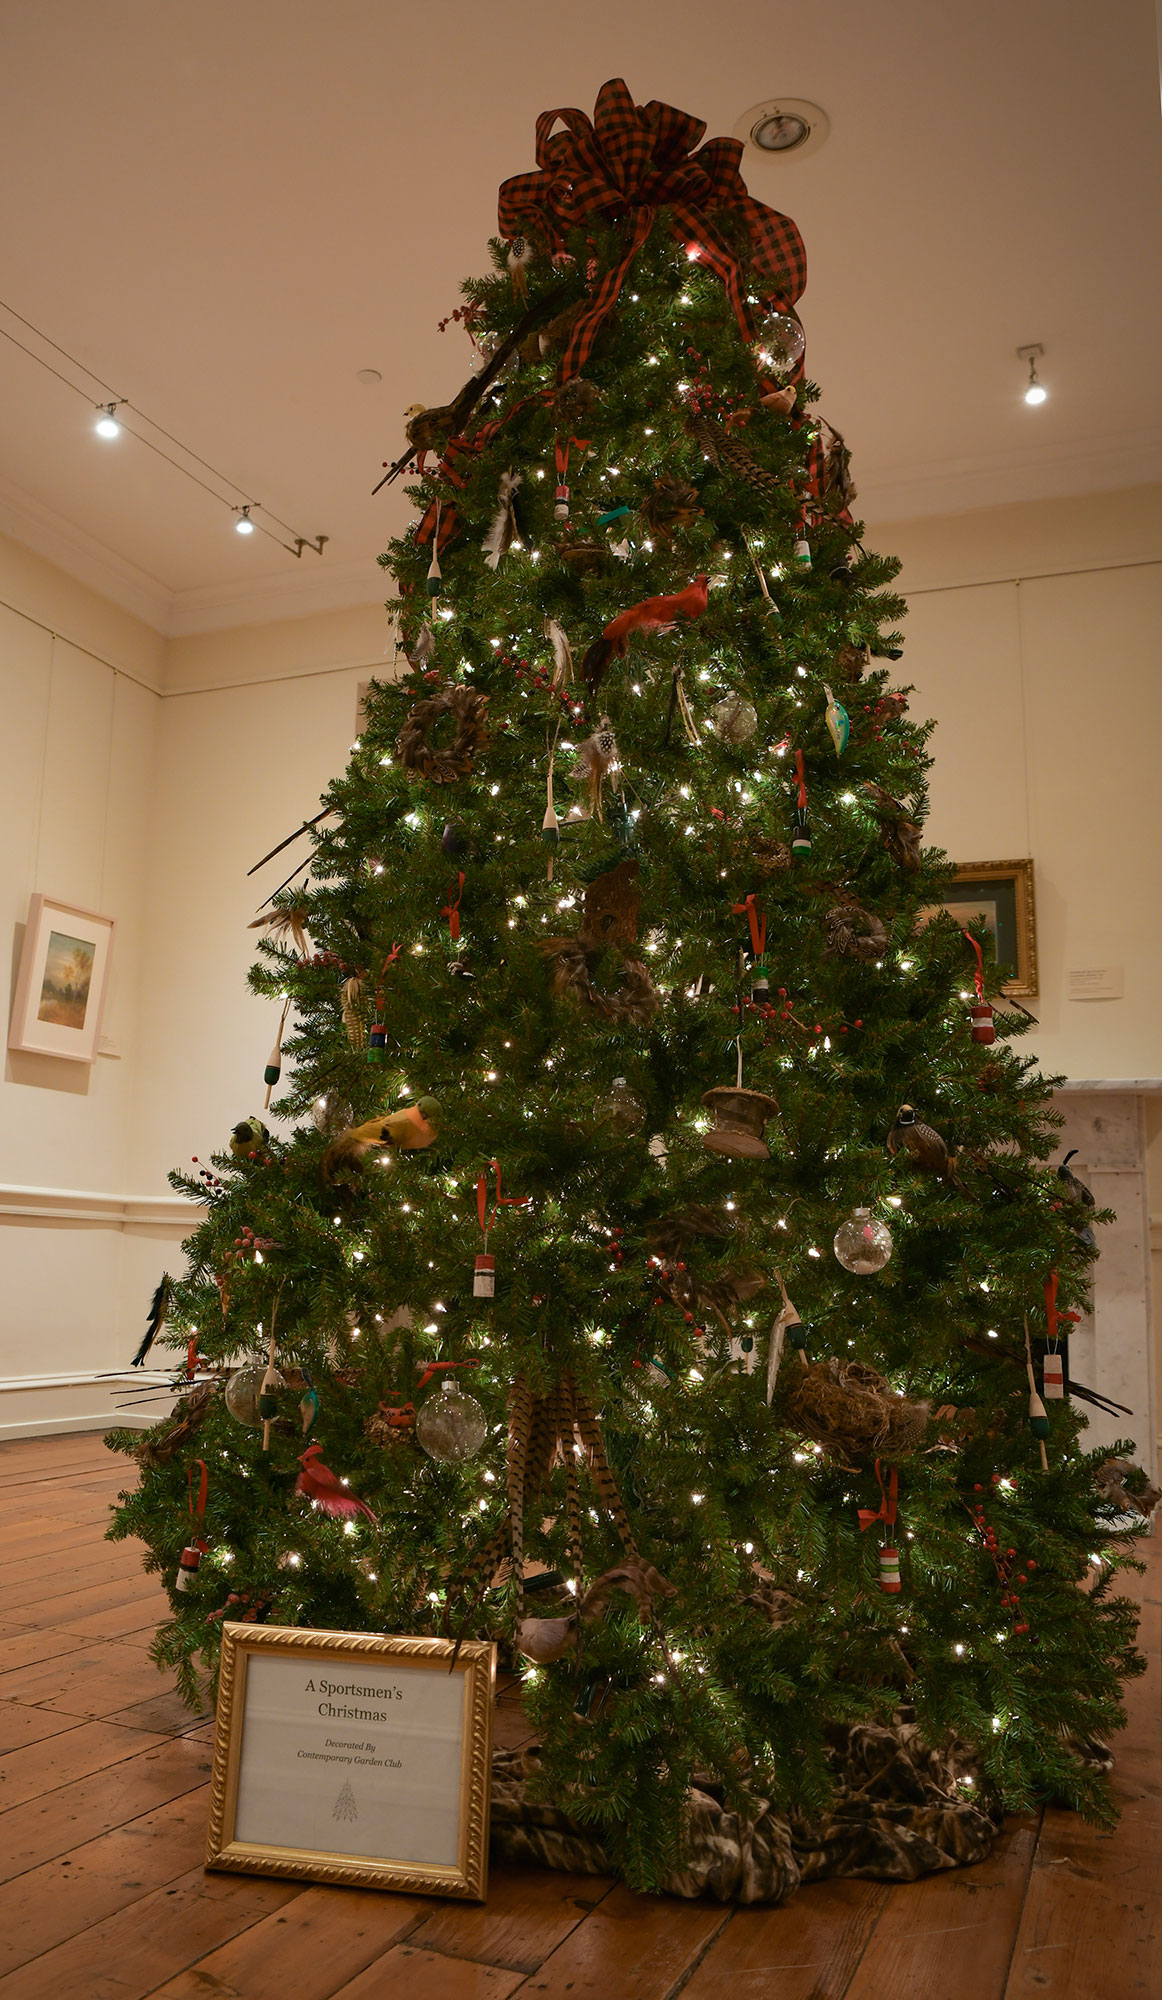 A Christmas tree, in a beige room with a wooden floor and paintings in the background, is decorated with feathers, bird ornaments and a red and black plaid bow at the top. A framed display at the front reads Sportsmens Christmas by the Contemporary 